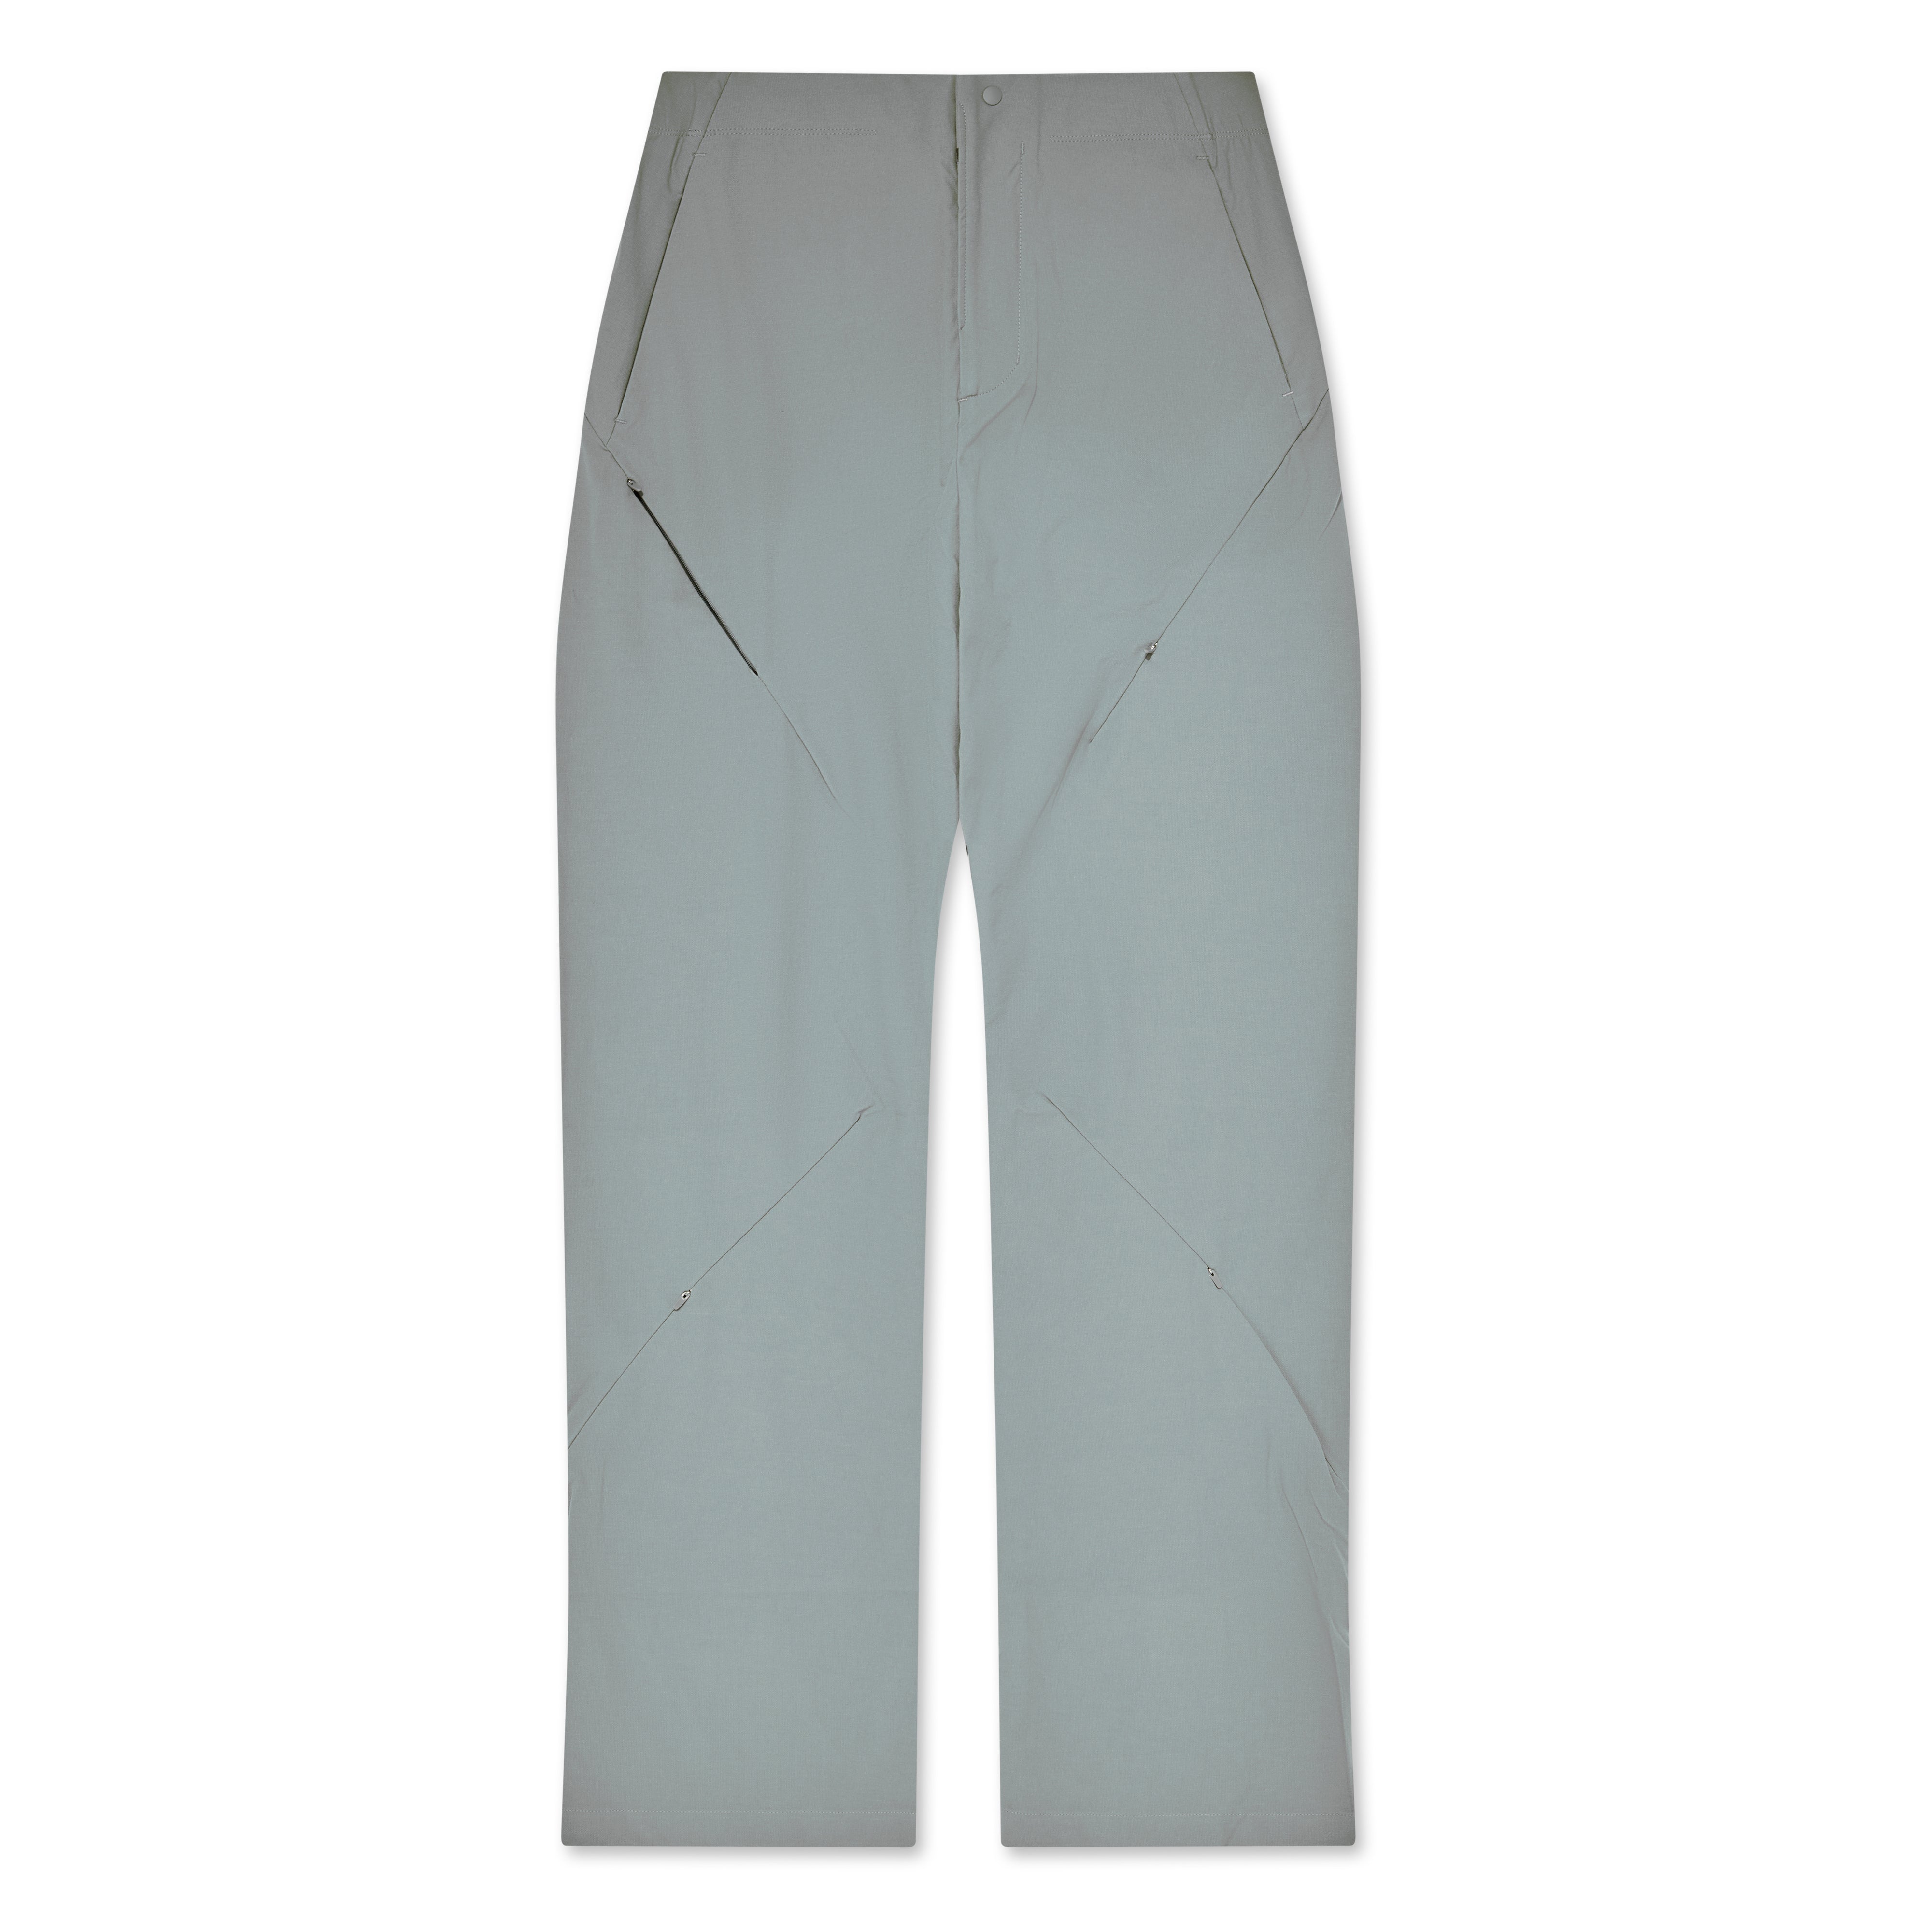 Post Archive Faction (PAF) - Men's 5.1 Technical Pants Right - (Grey Blue)